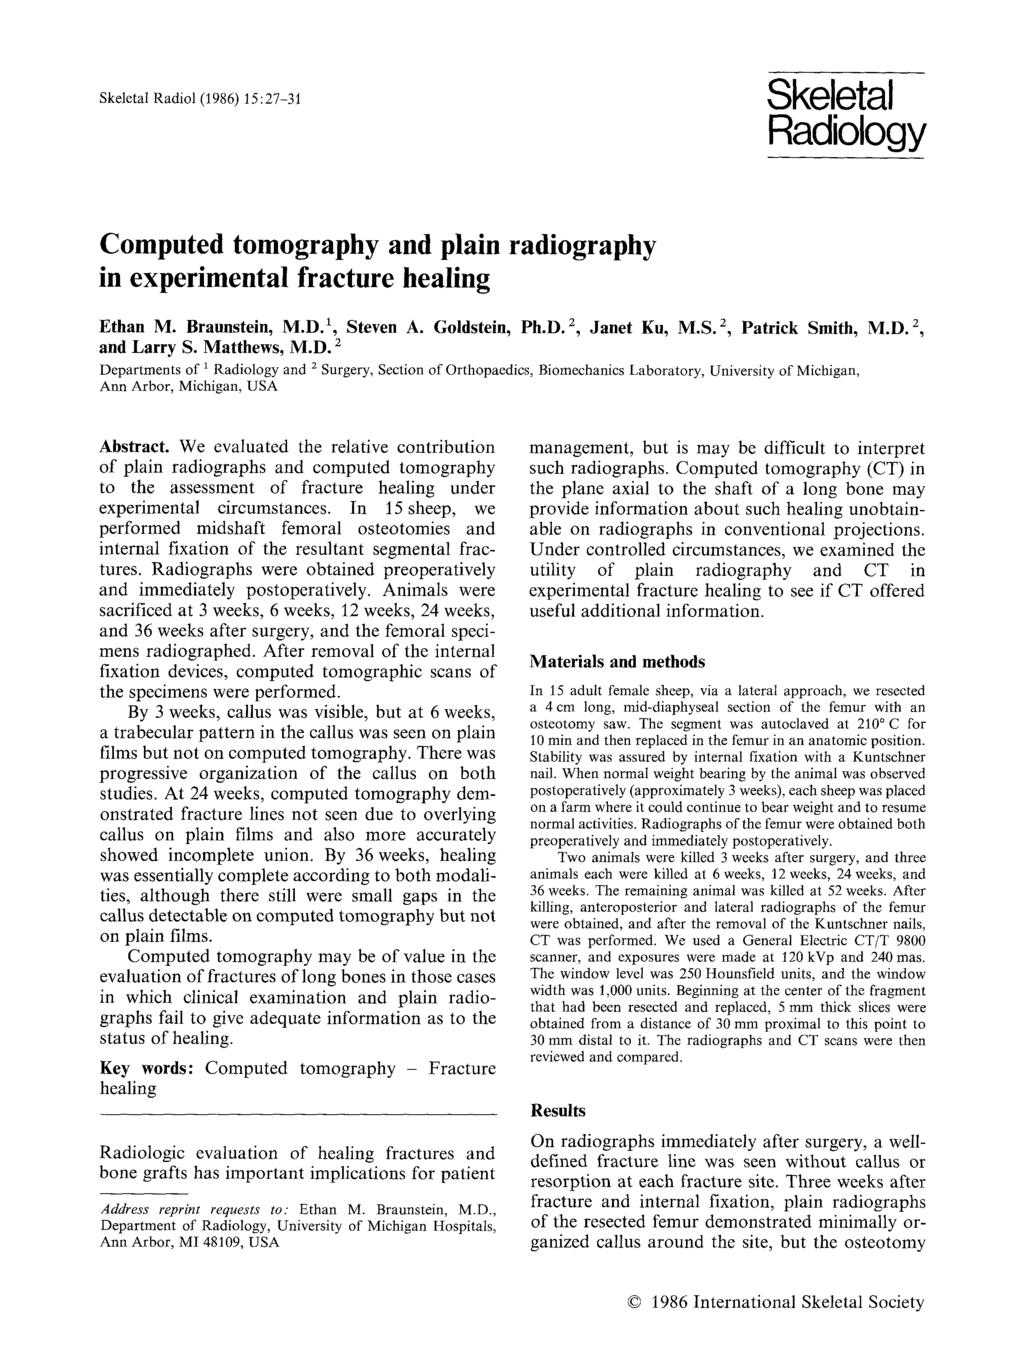 Skeletal Radiol (1986) 15:27-31 Skeletal Radiology Computed tomography and plain radiography in experimental fracture healing Ethan M. Braunstein, M.D. 1, Steven A. Goldstein, Ph.D. 2, Janet Ku, M.S. 2, Patrick Smith, M.